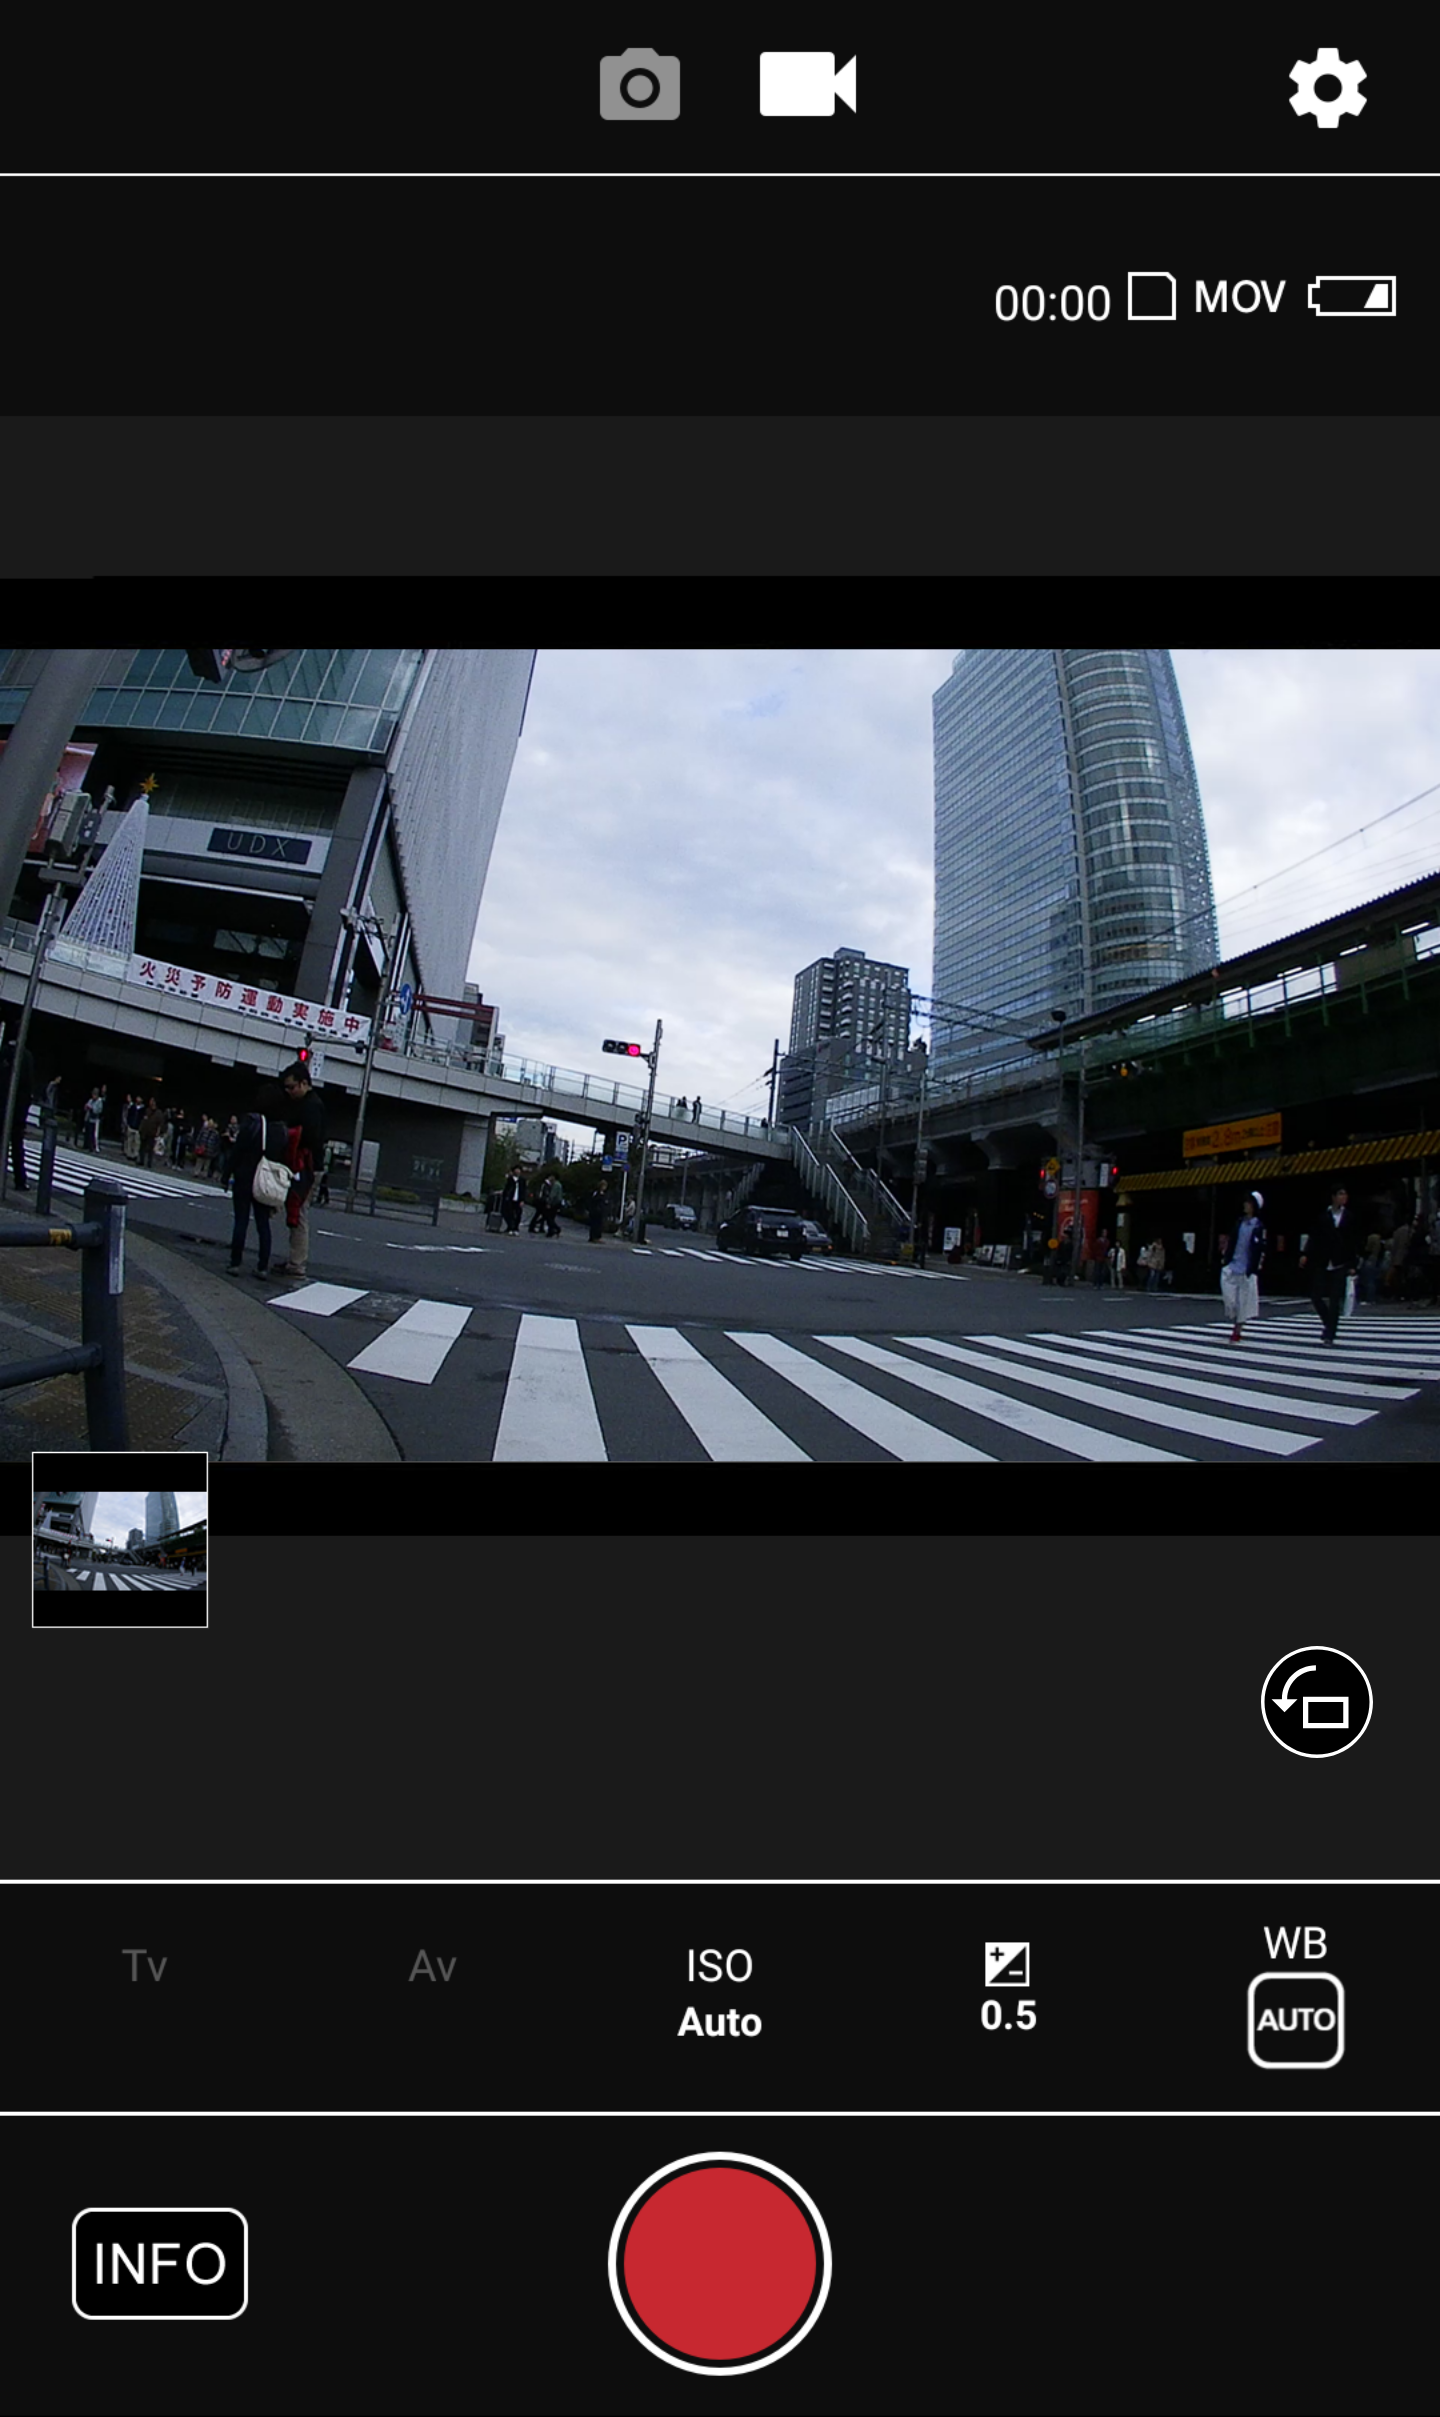 Shooting of movies and still images from the smart device is possible.